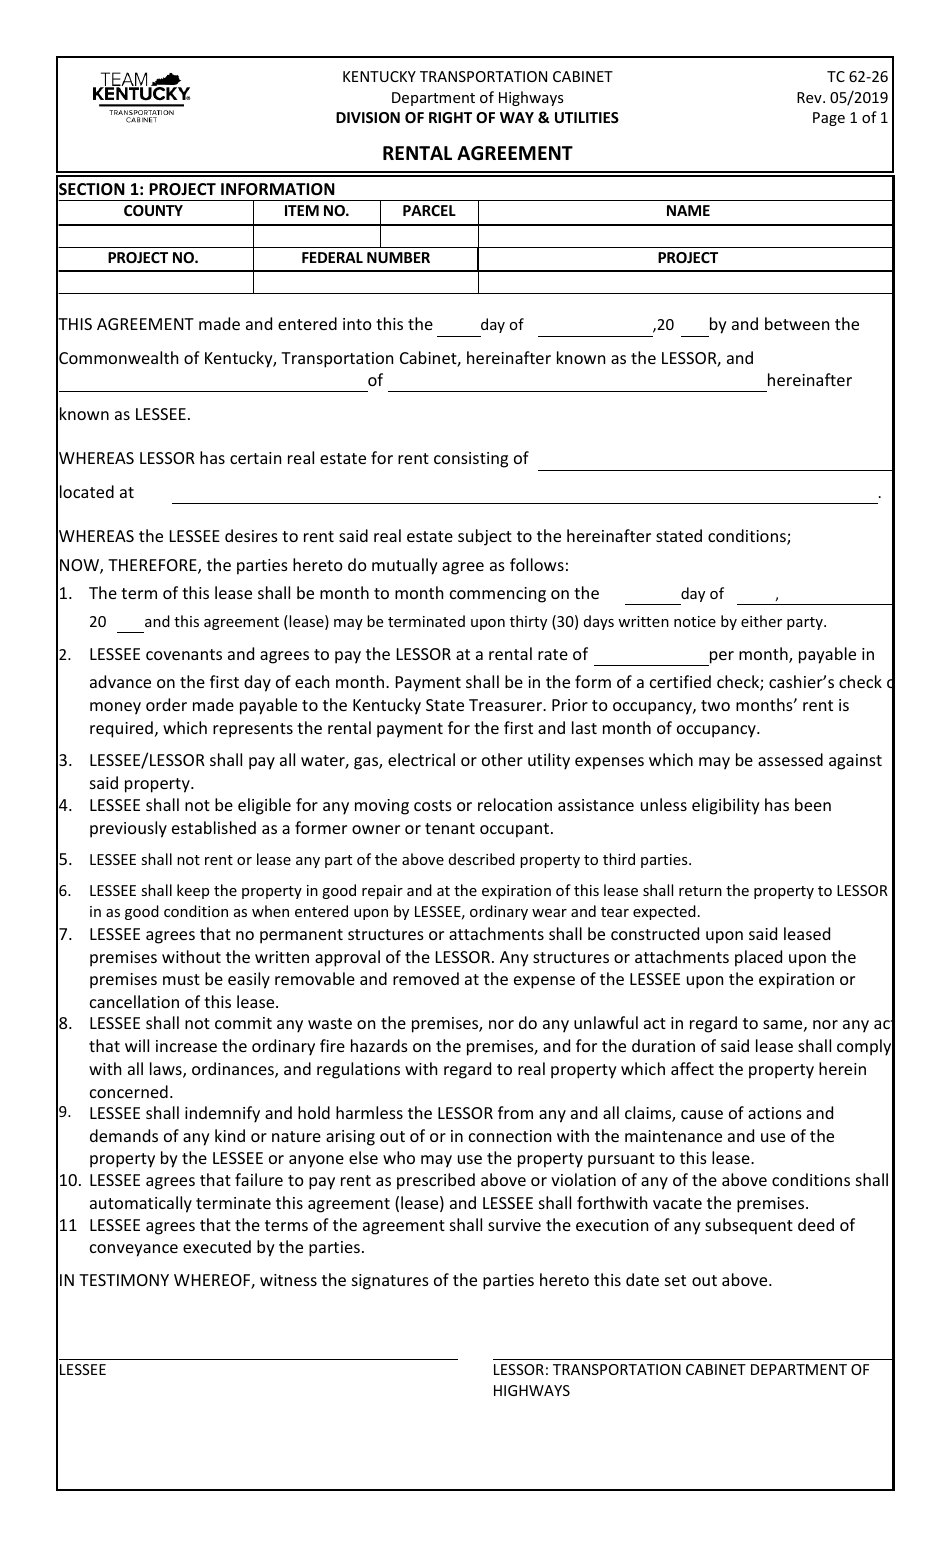 Form TC62-26 Rental Agreement - Kentucky, Page 1